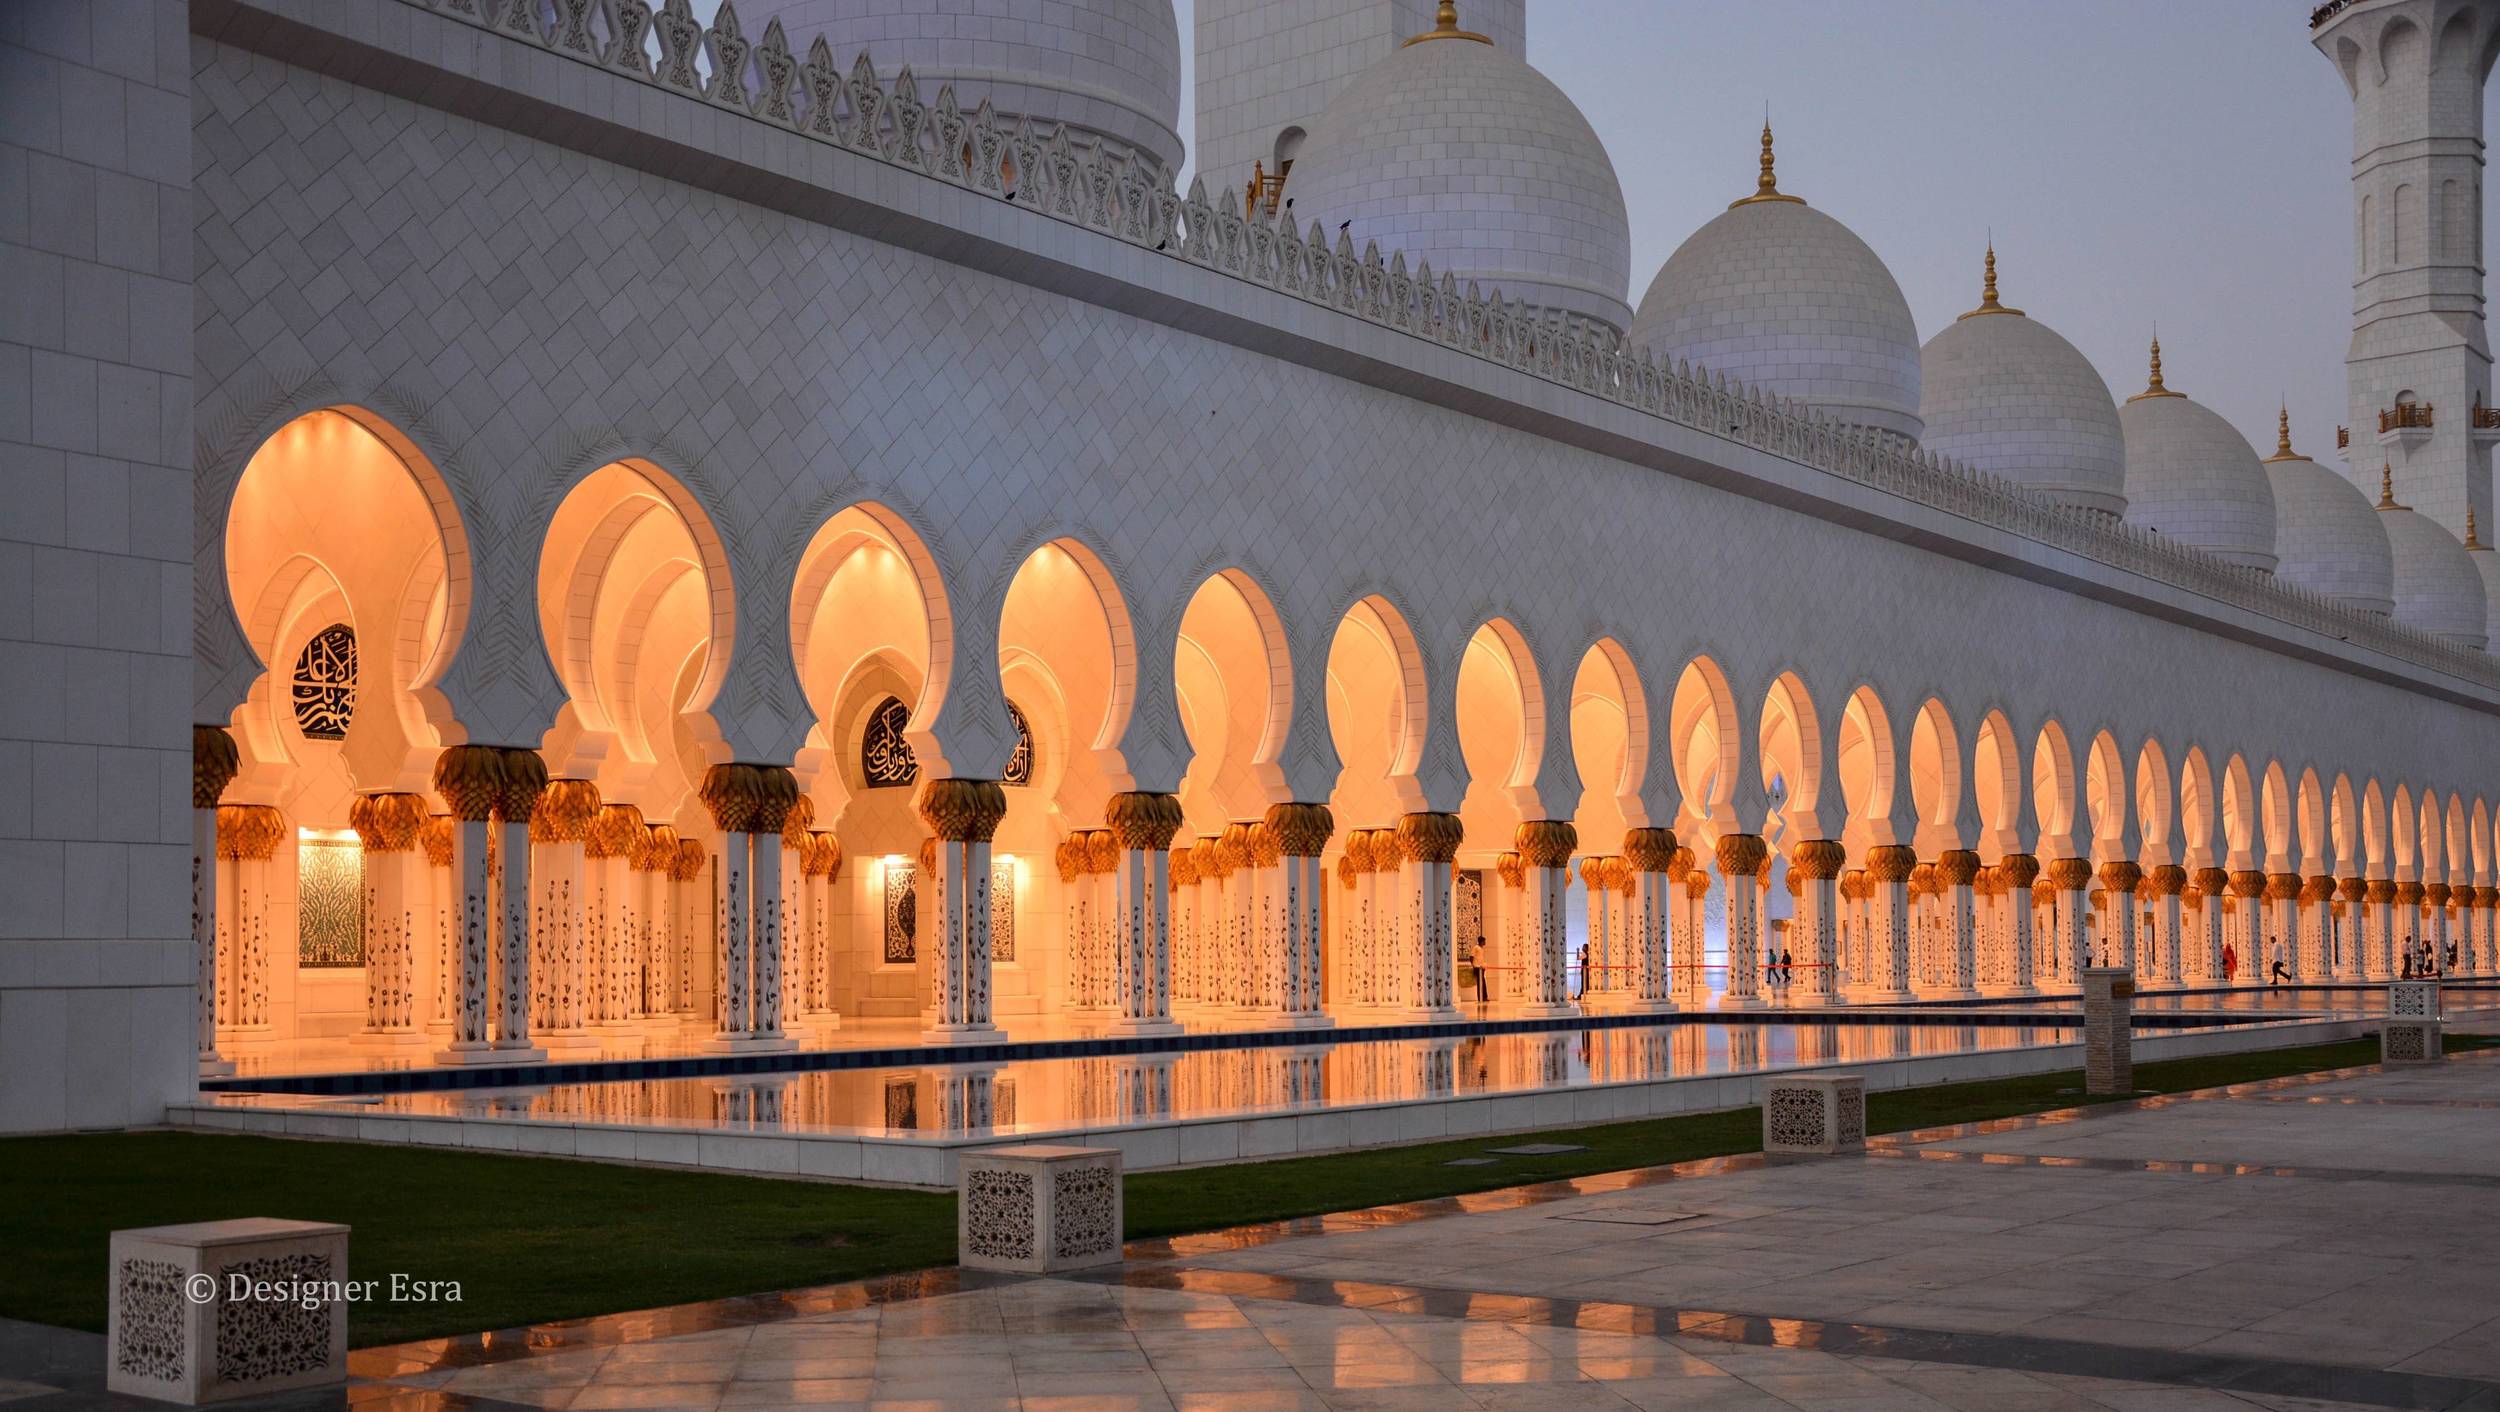 Sheikh Zayed Grand Mosque's white arches and domes